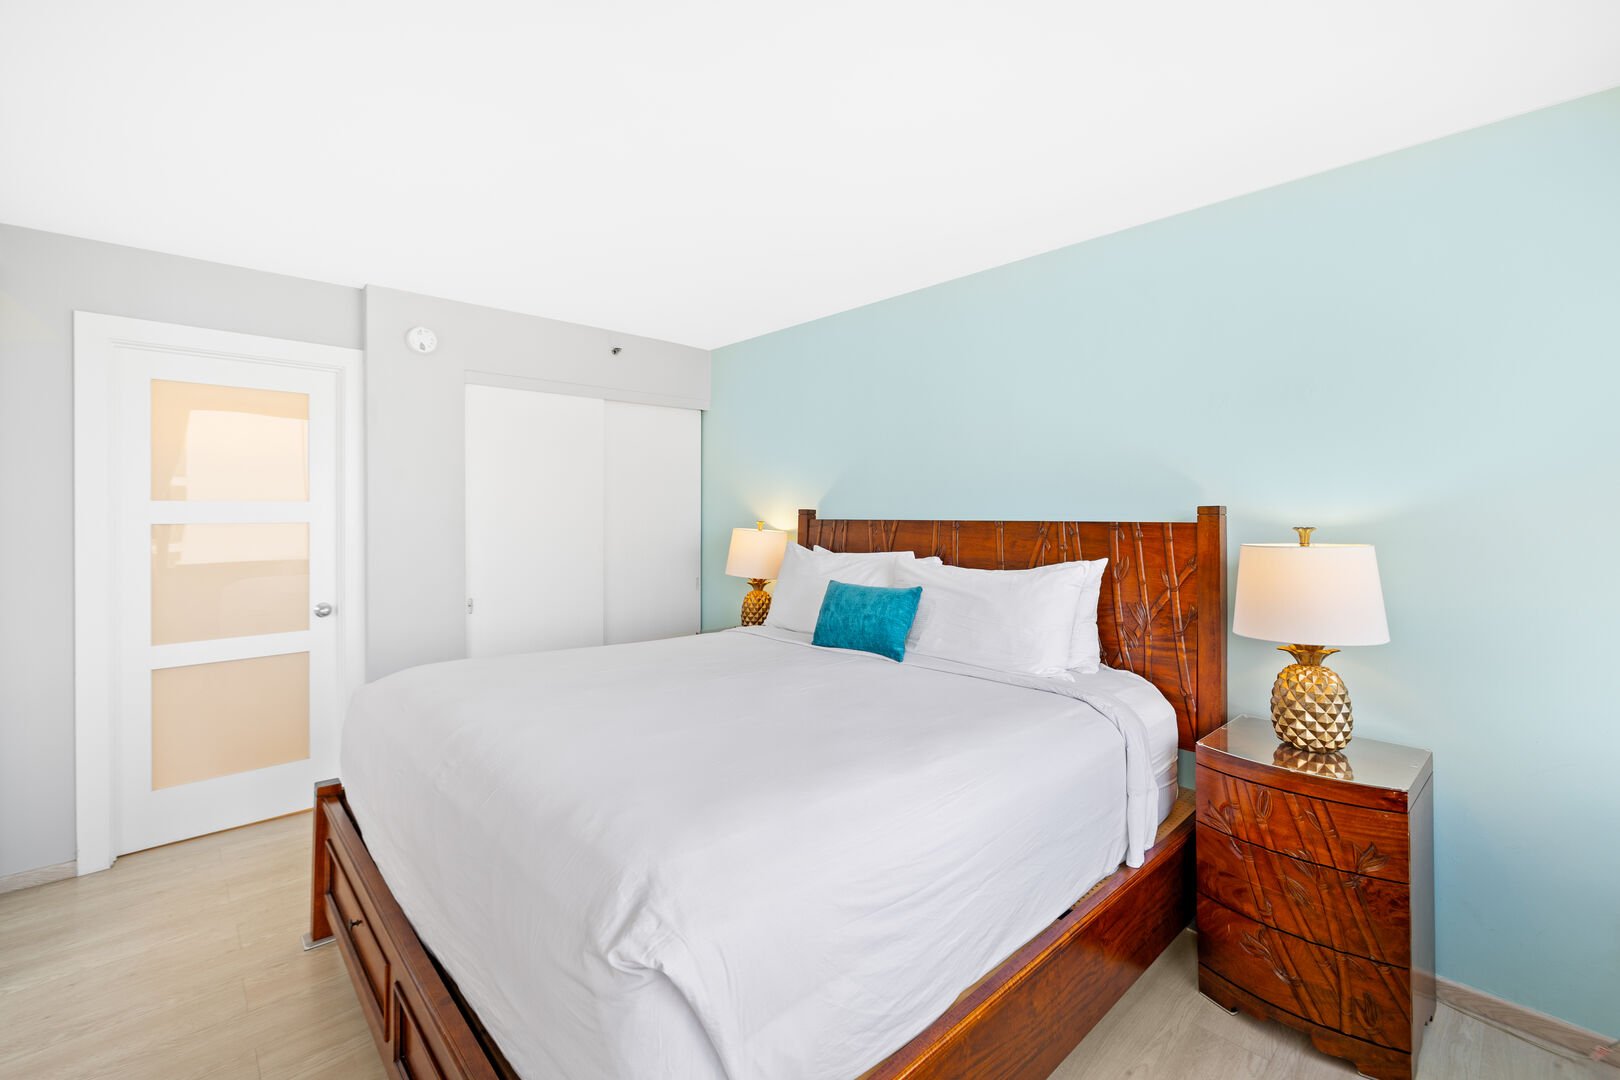 The bedroom features a king-size bed, 2 nightstands, and a closet!